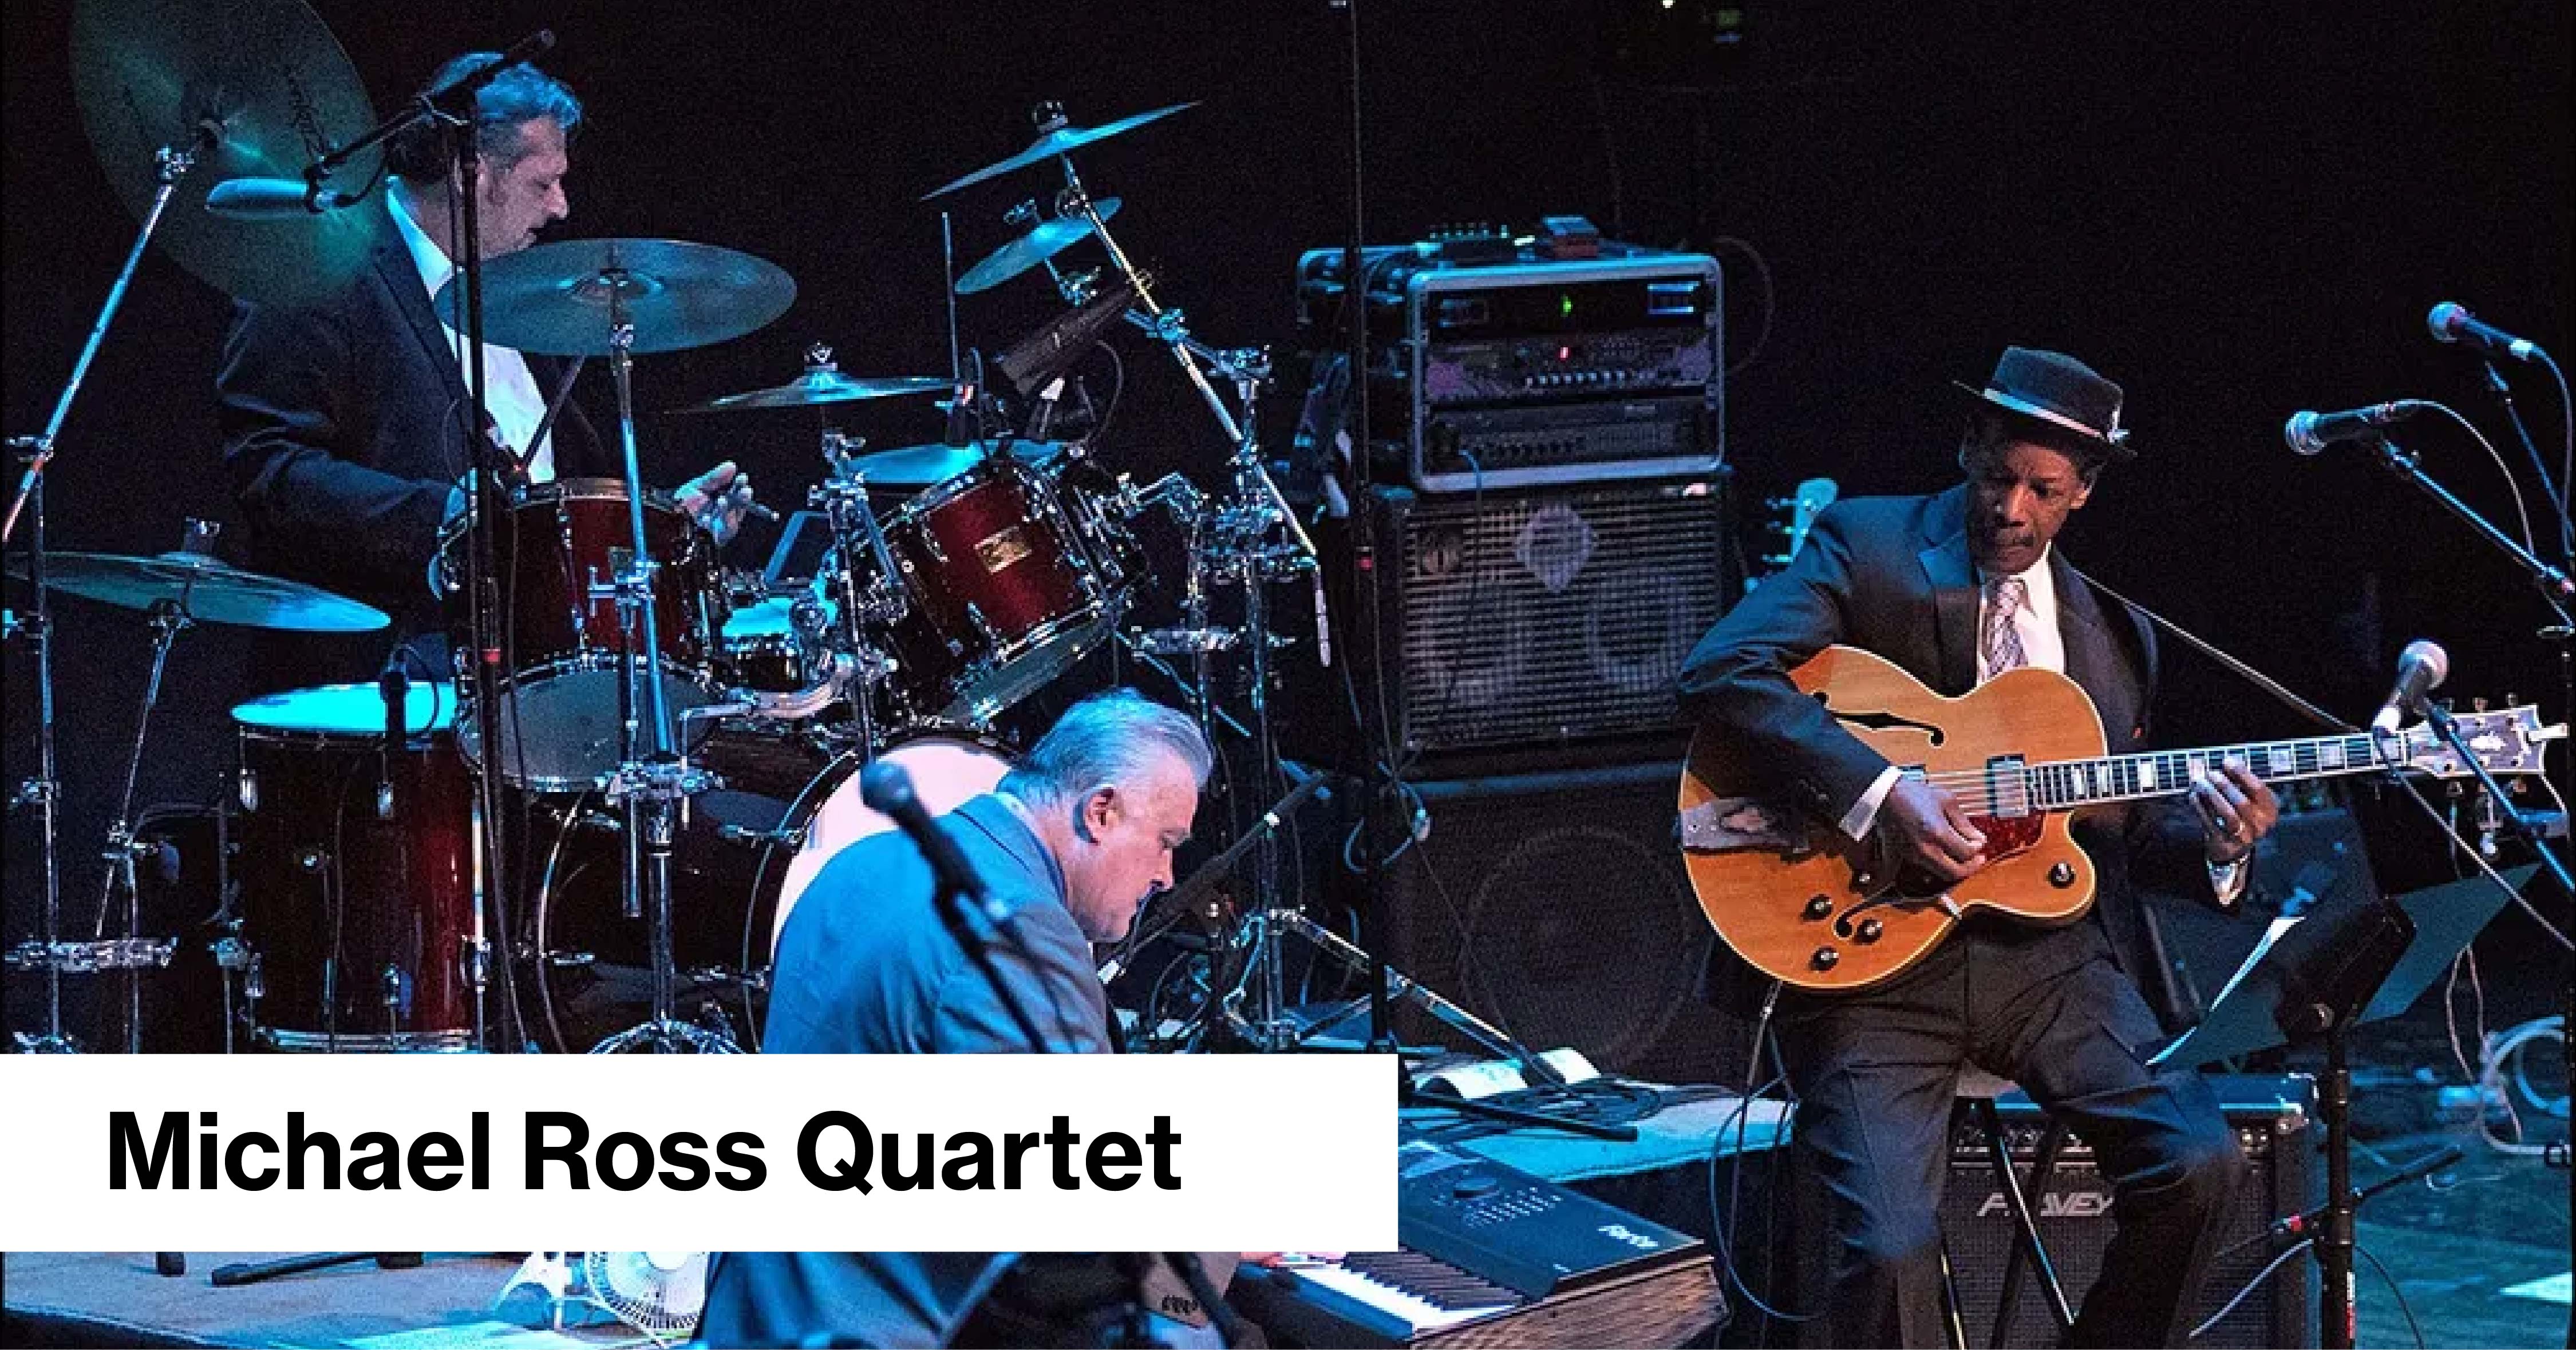 Guitarist, drummer, and keys player with "Michael Ross Quartet" label on the left